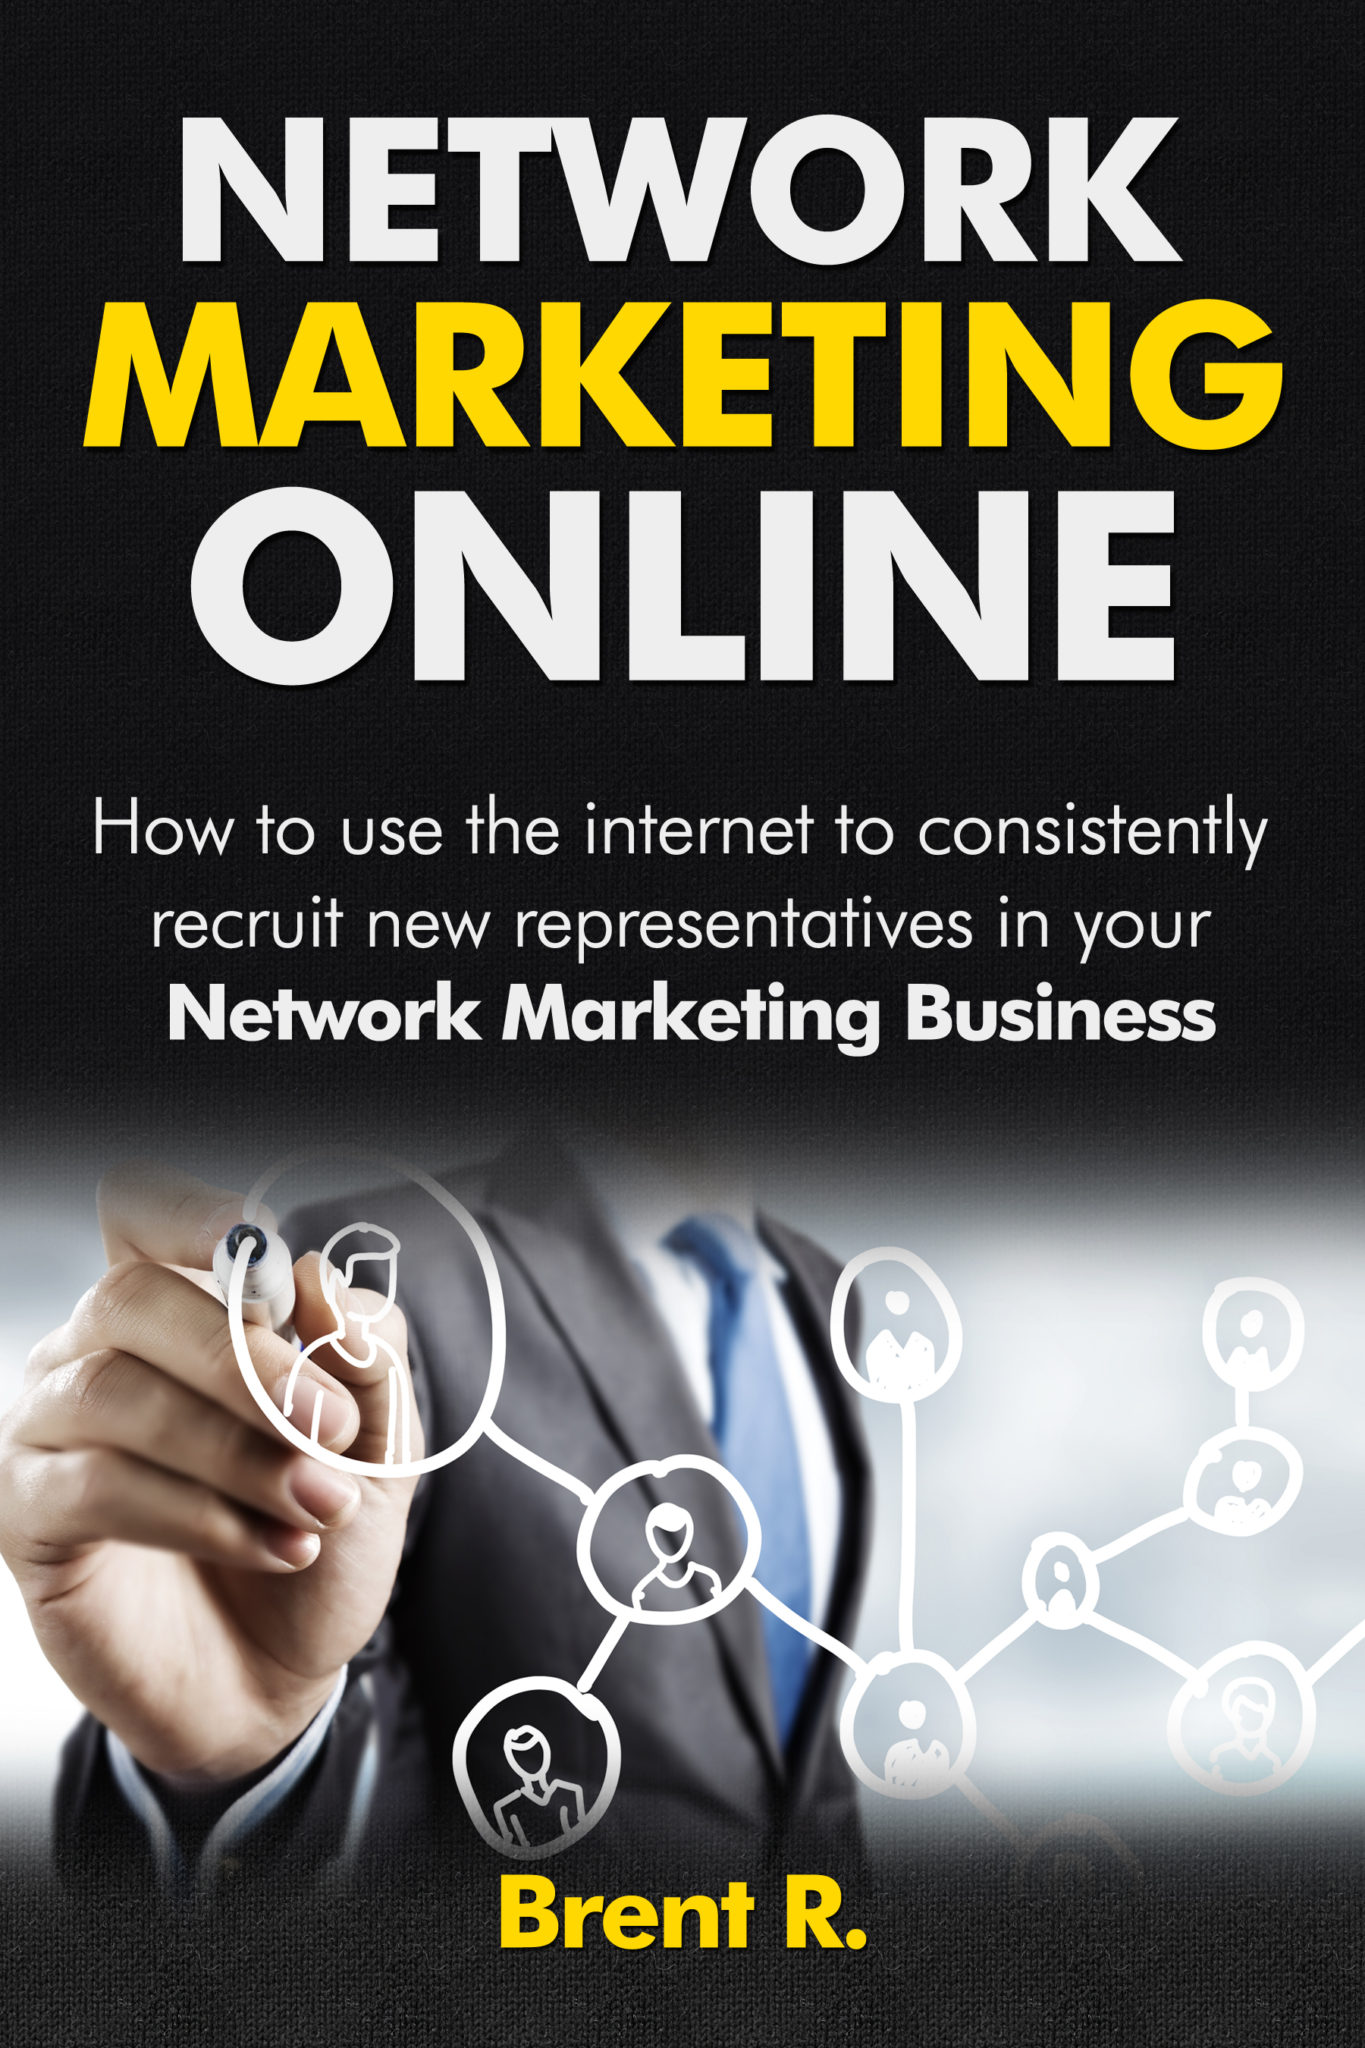 FREE: Network Marketing Books: Network Marketing Online: How To Use The Internet To Consistently Recruit New Representatives In Your Network Marketing Business by Brent R